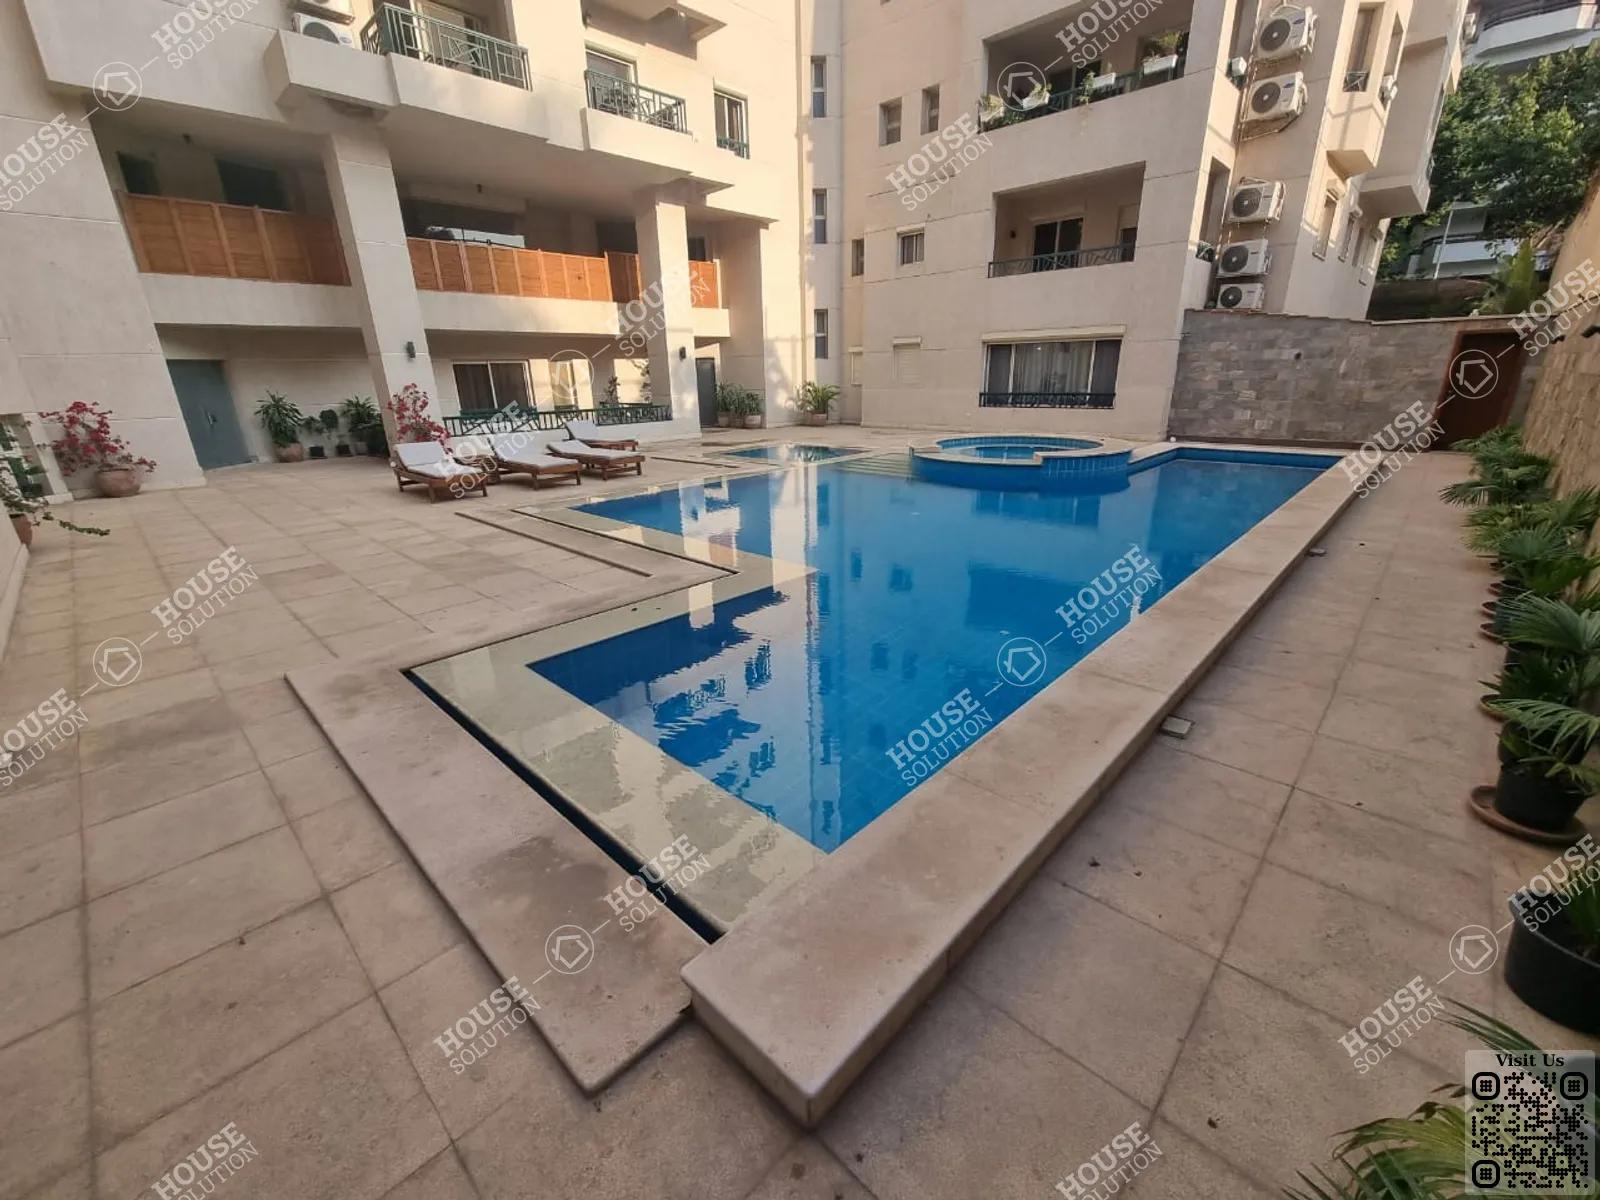 SHARED SWIMMING POOL  @ Ground Floors For Rent In Maadi Maadi Sarayat Area: 150 m² consists of 2 Bedrooms 3 Bathrooms Modern furnished 5 stars #5614-0